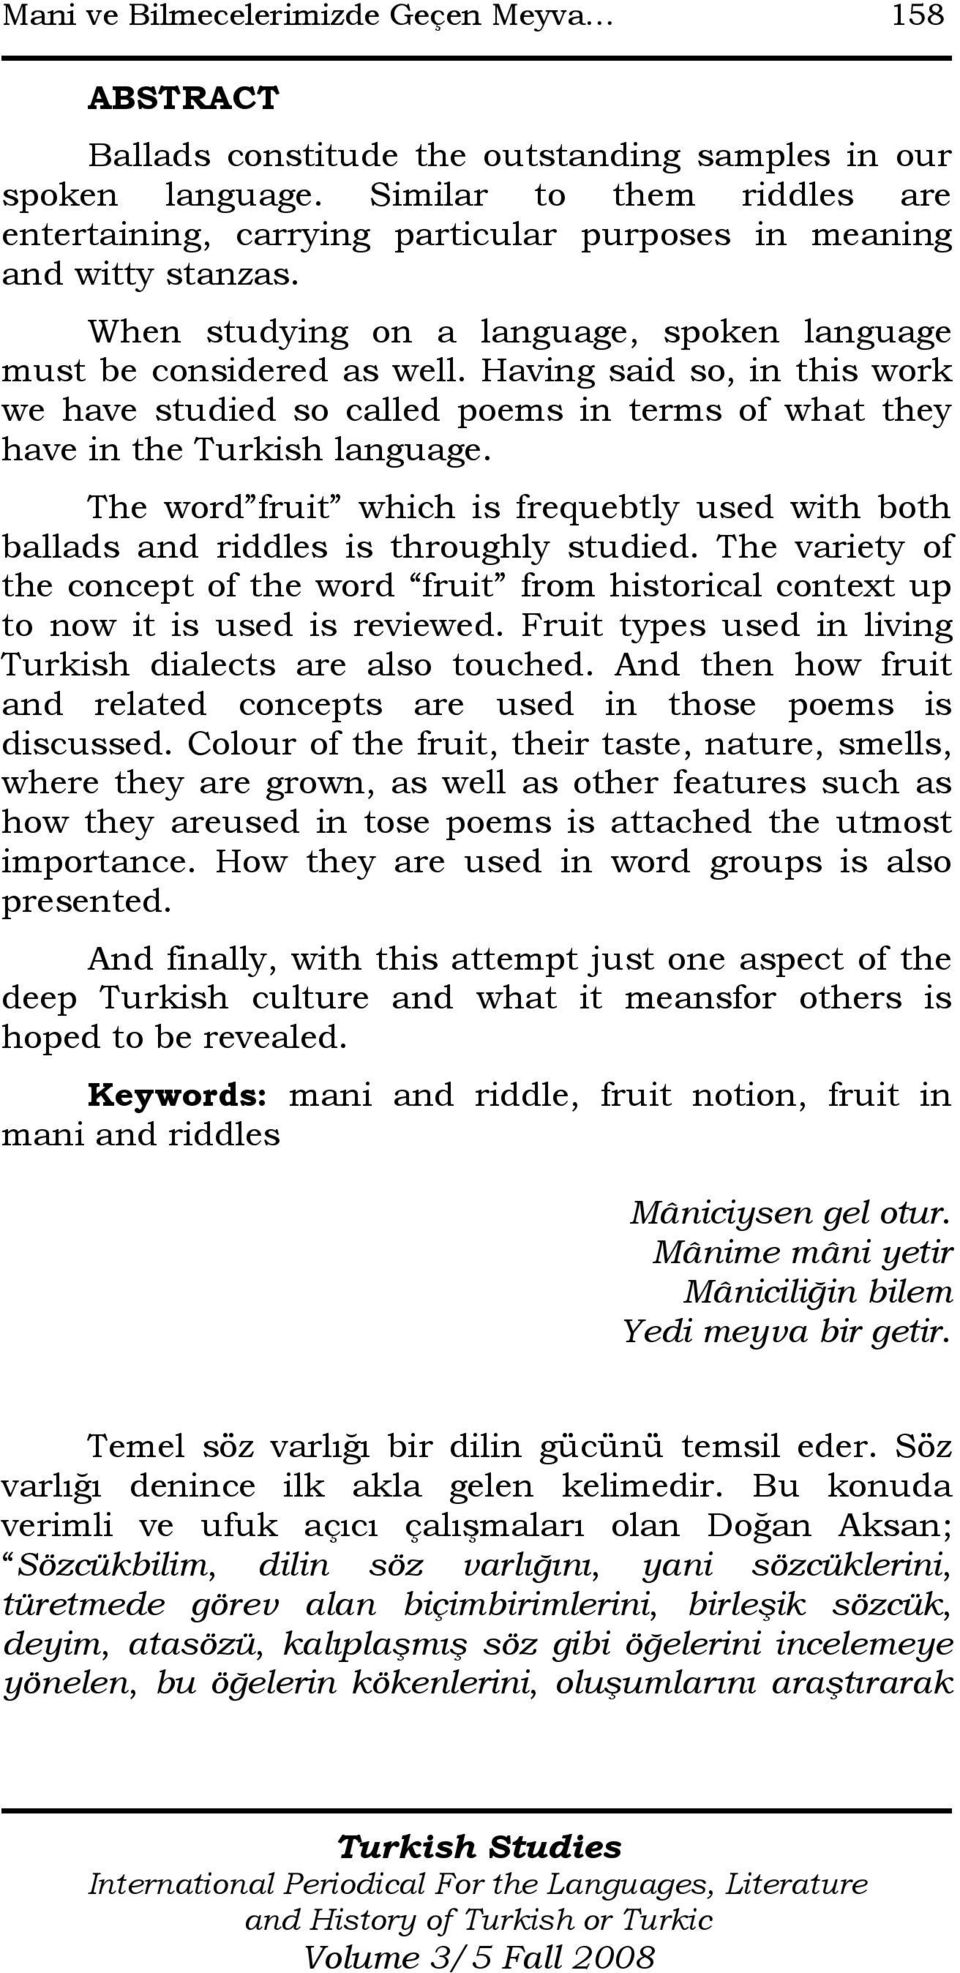 Having said so, in this work we have studied so called poems in terms of what they have in the Turkish language.